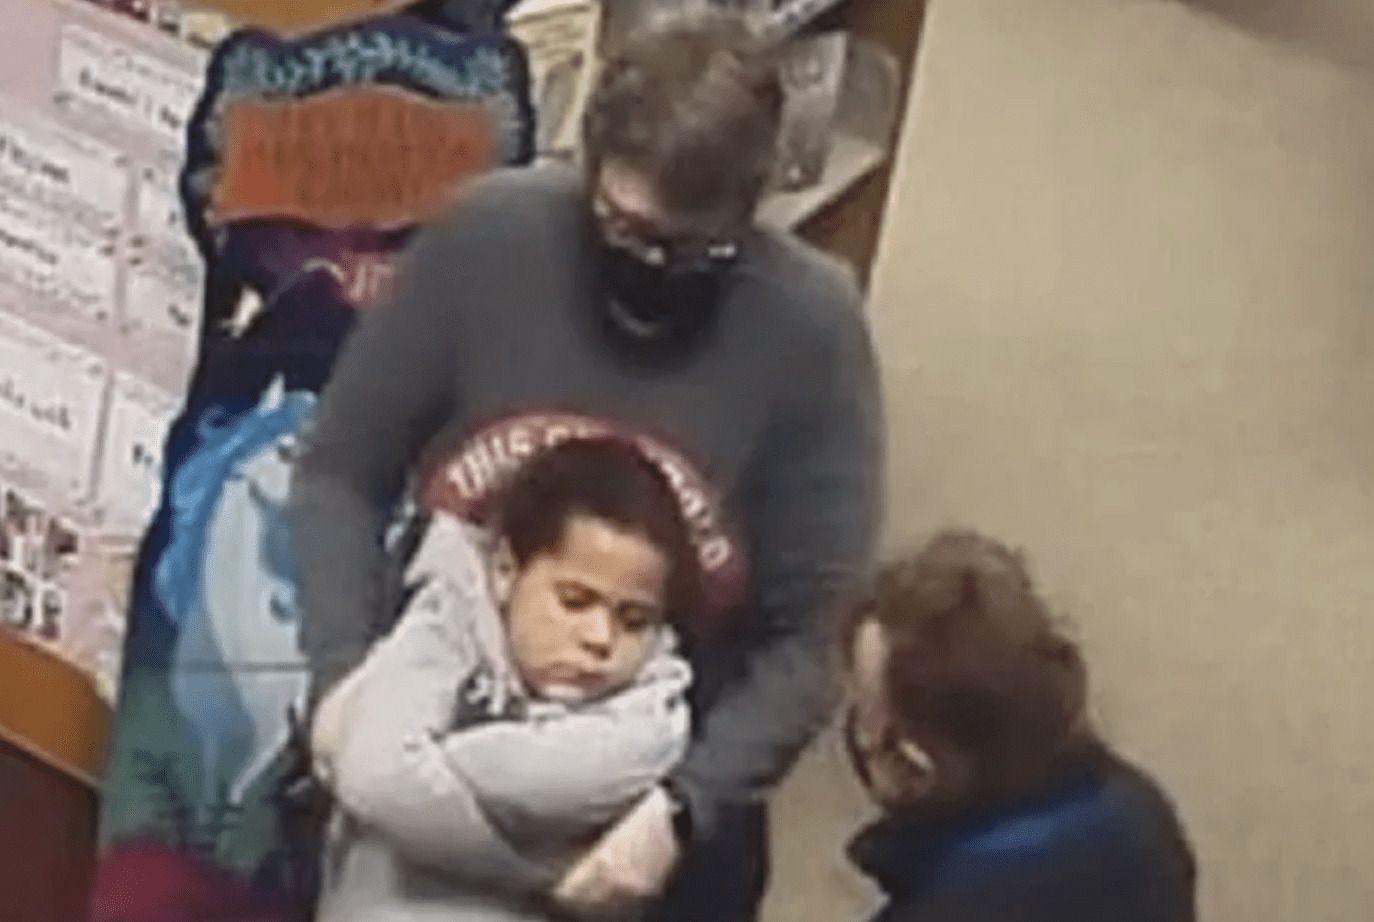 Did a Special Ed Teacher Choke a 7-Year-Old For Not Wearing a Mask? You Decide.